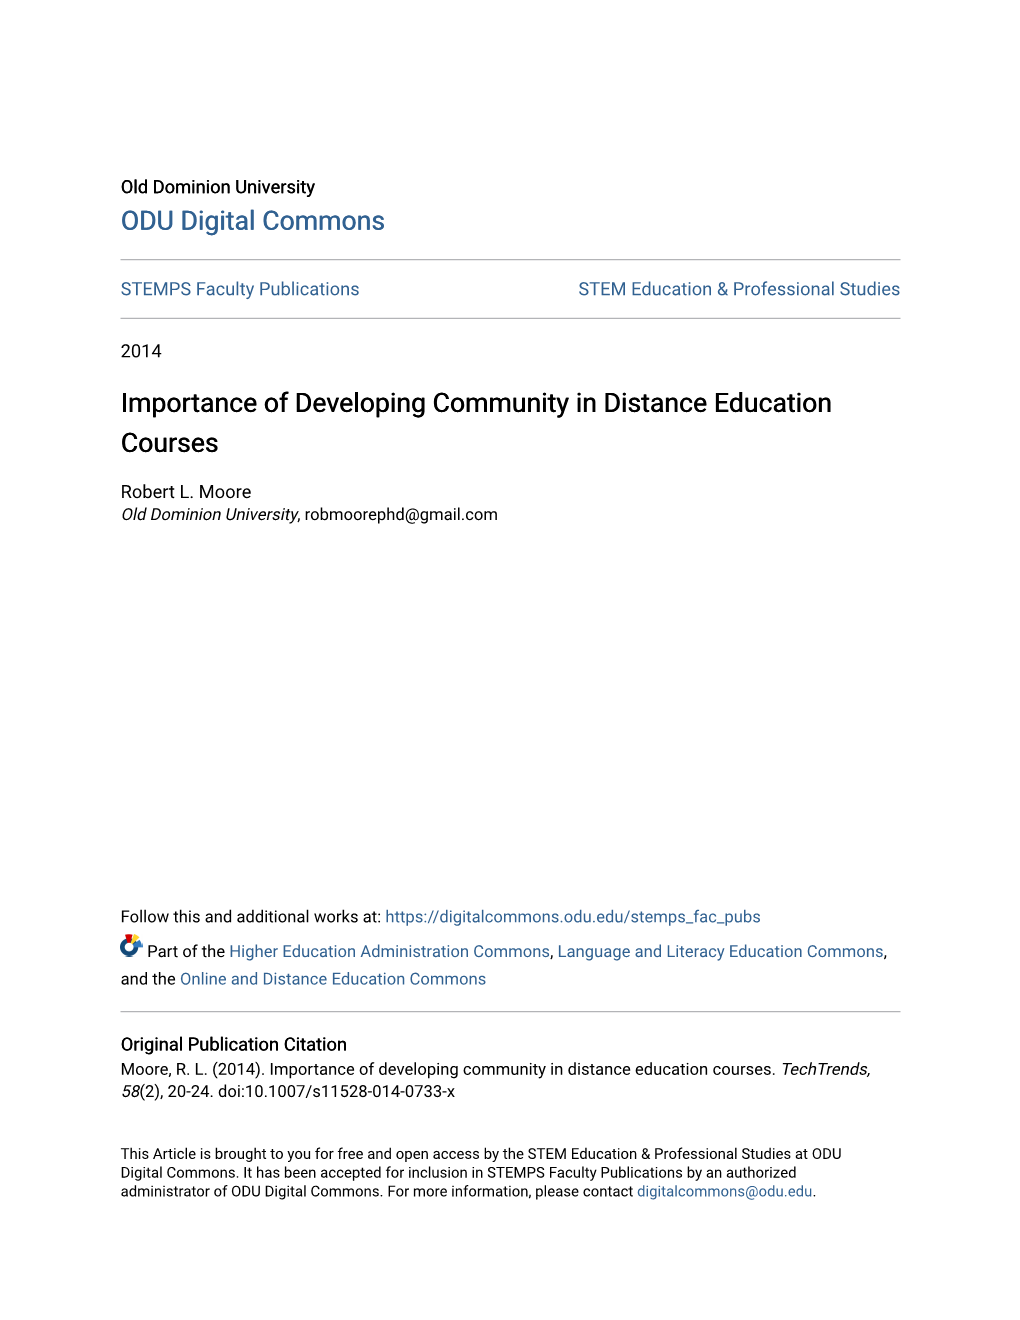 Importance of Developing Community in Distance Education Courses